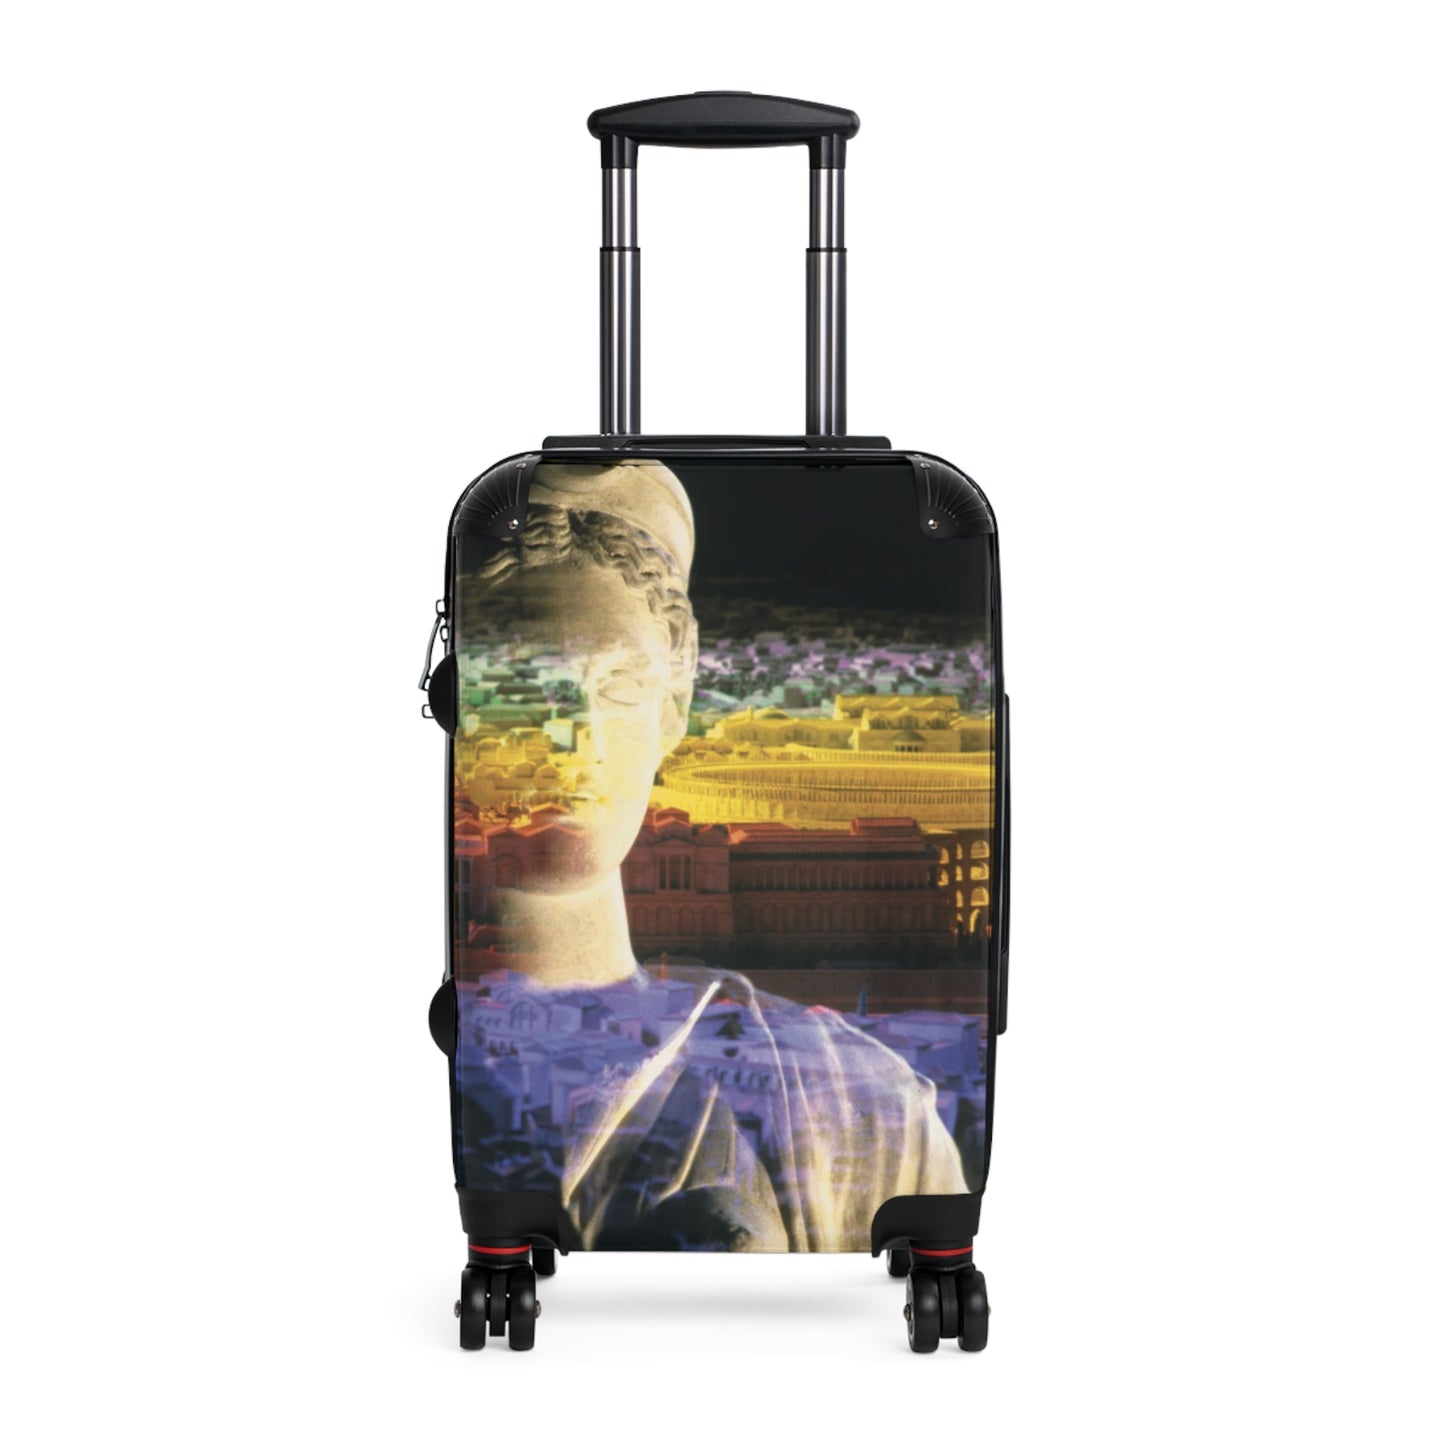 Diana oversees Rome Luggage